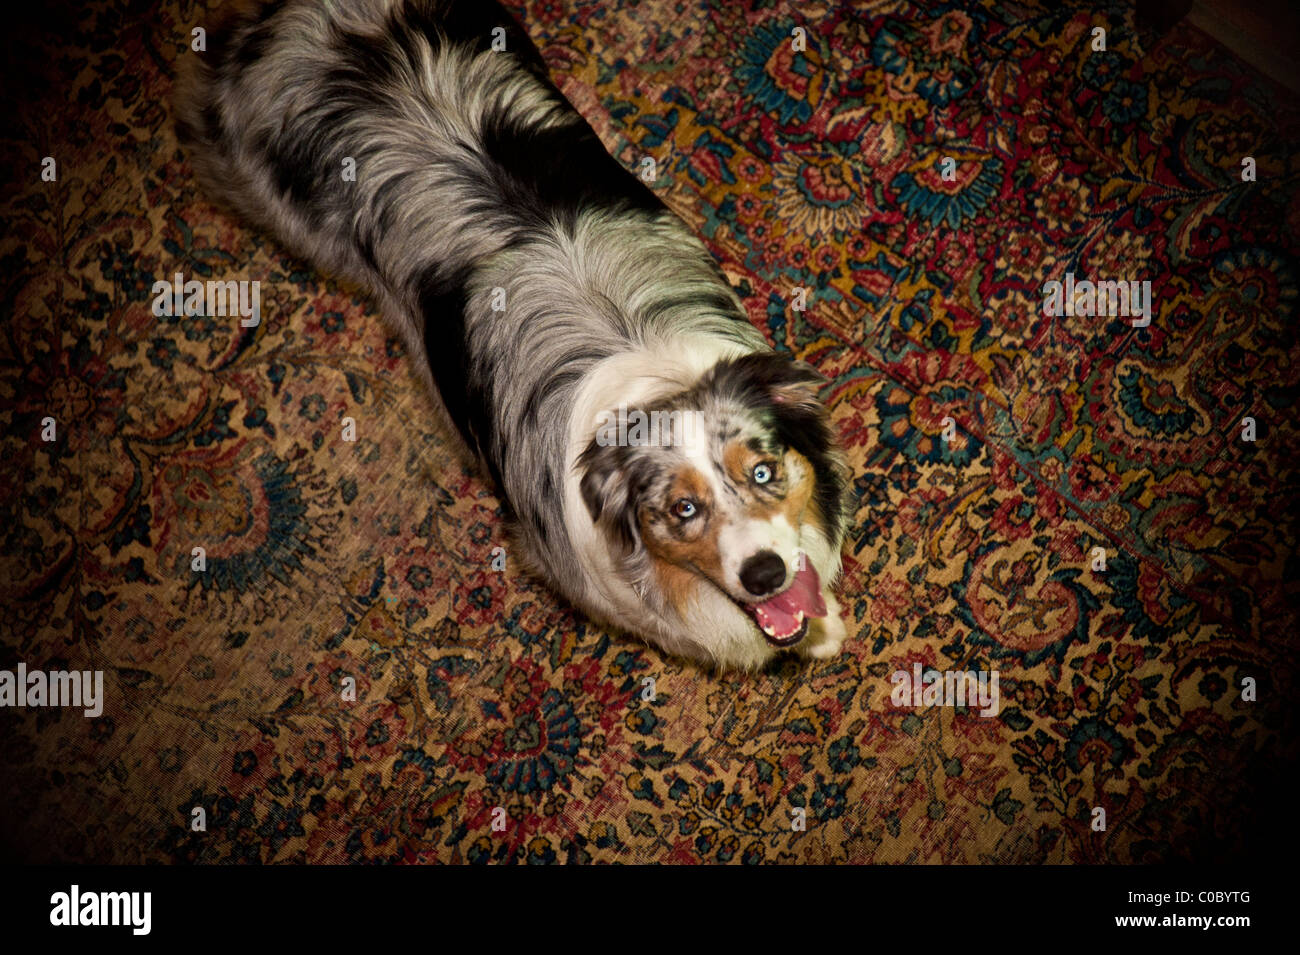 Cutter the incredible Australian Shepherd looking up and ready to pounce. Shot from a high perspective. Stock Photo